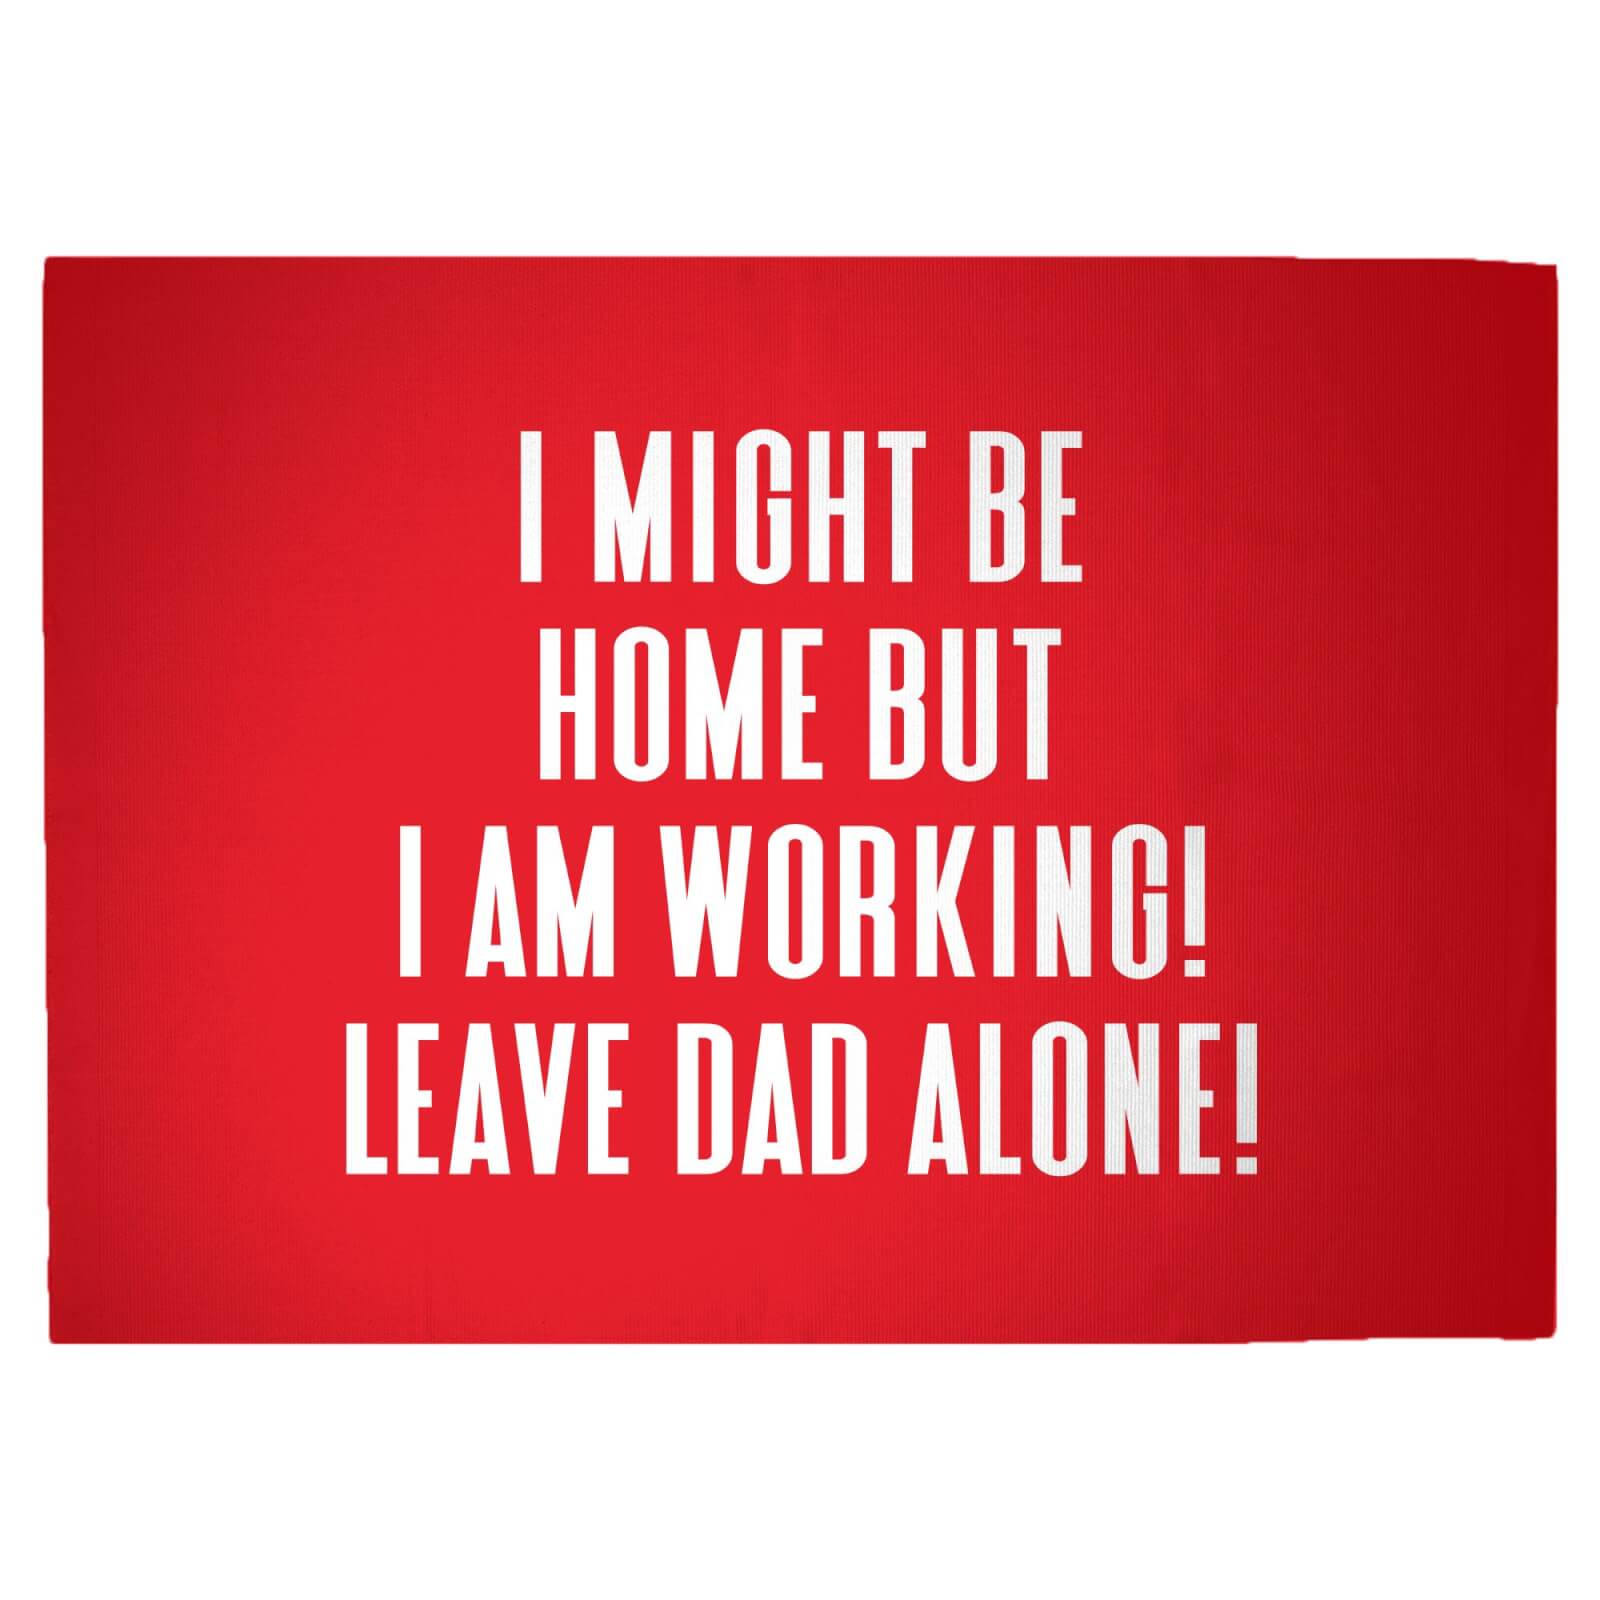 I Might Be Home But I Am Working Leave Dad Alone! Woven Rug - Large